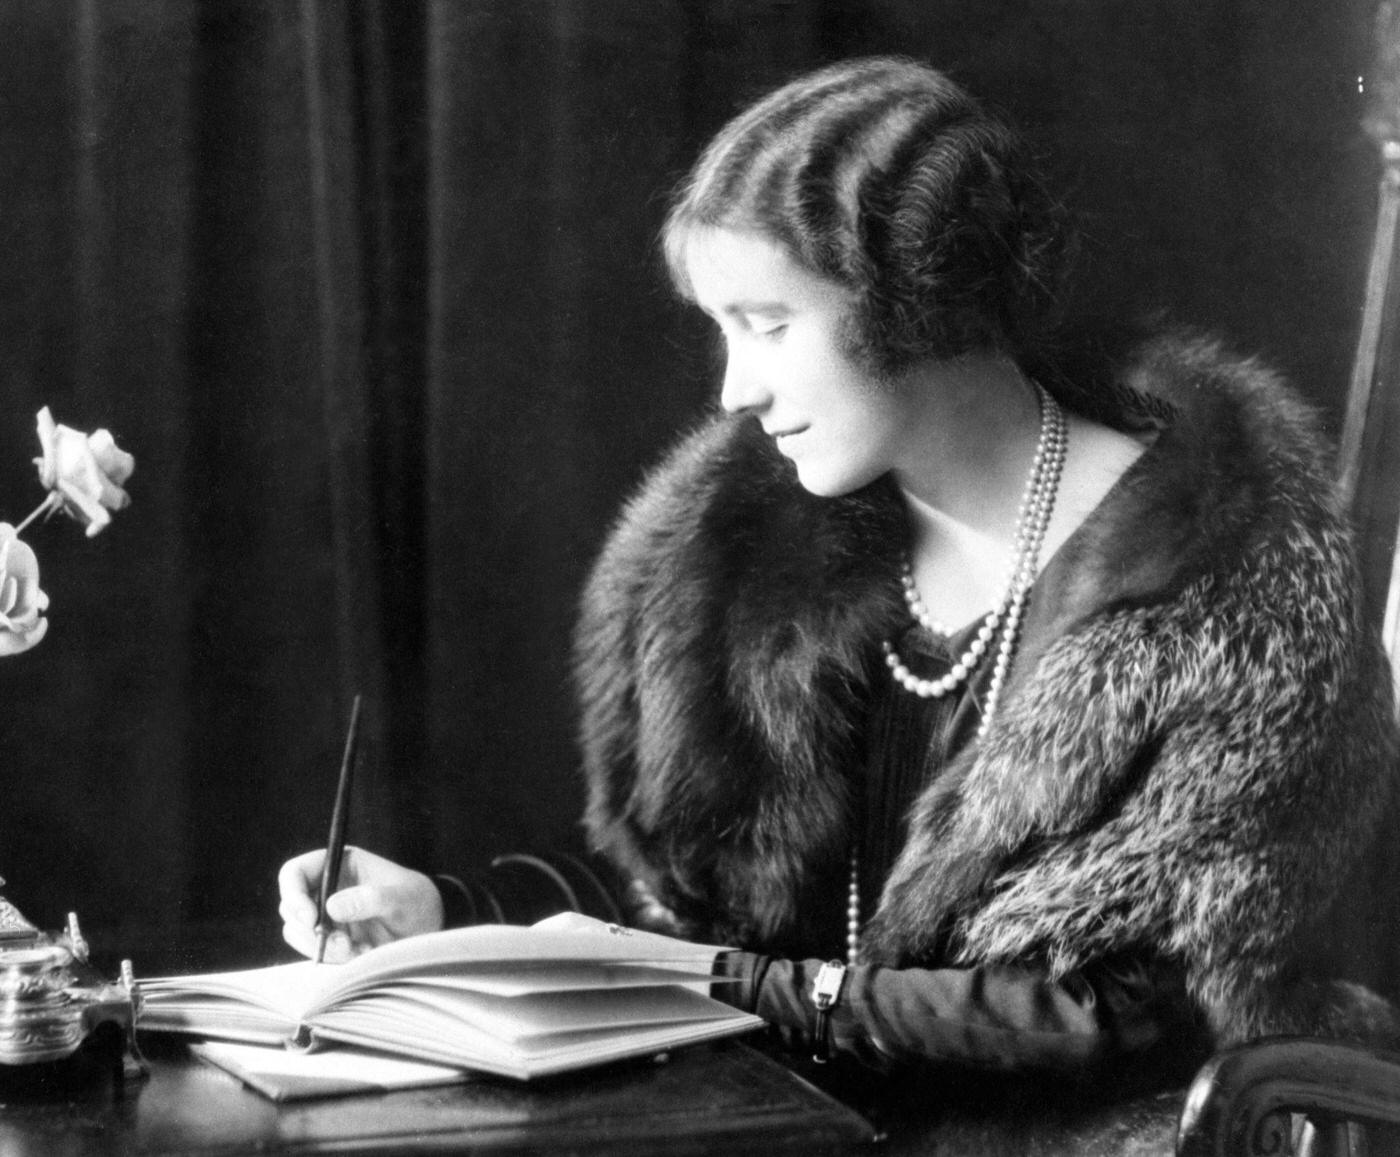 Lady Elizabeth Bowes-Lyon writing in 1922, before her marriage to Duke of York (later King George VI)